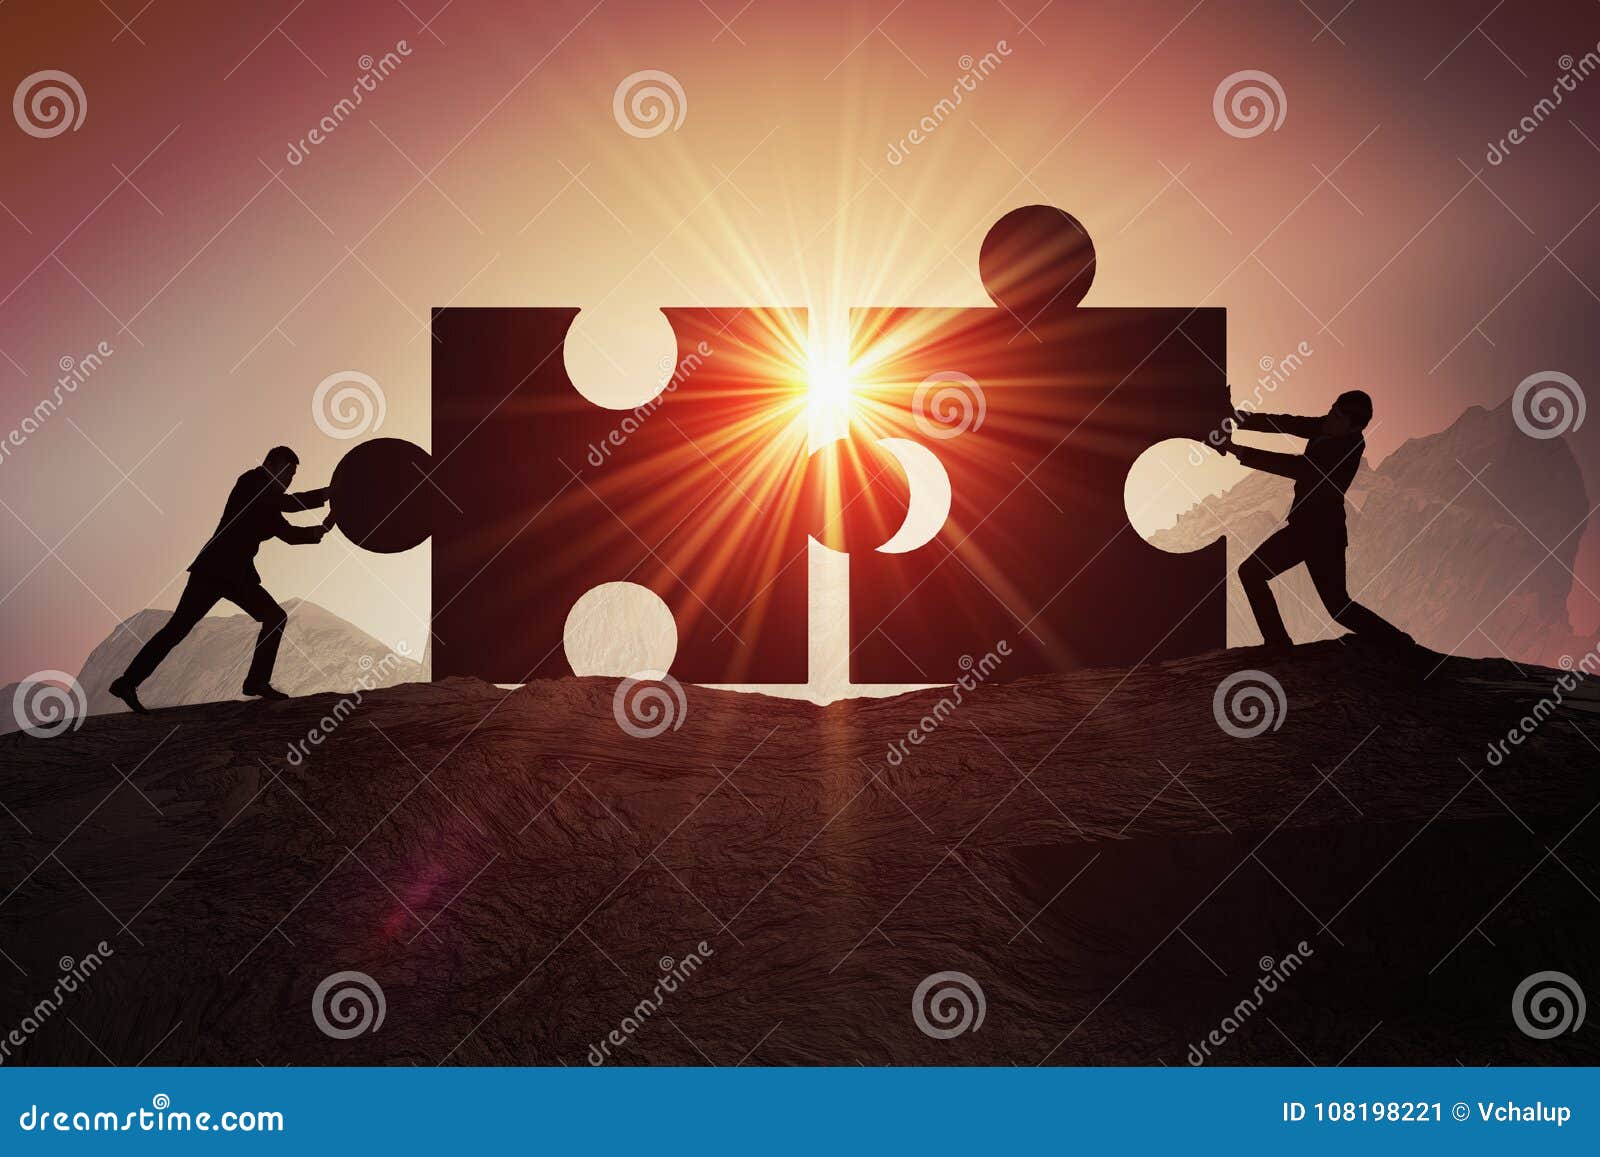 teamwork, partnership and cooperation concept. silhouettes of two businessman joining two pieces of puzzle together